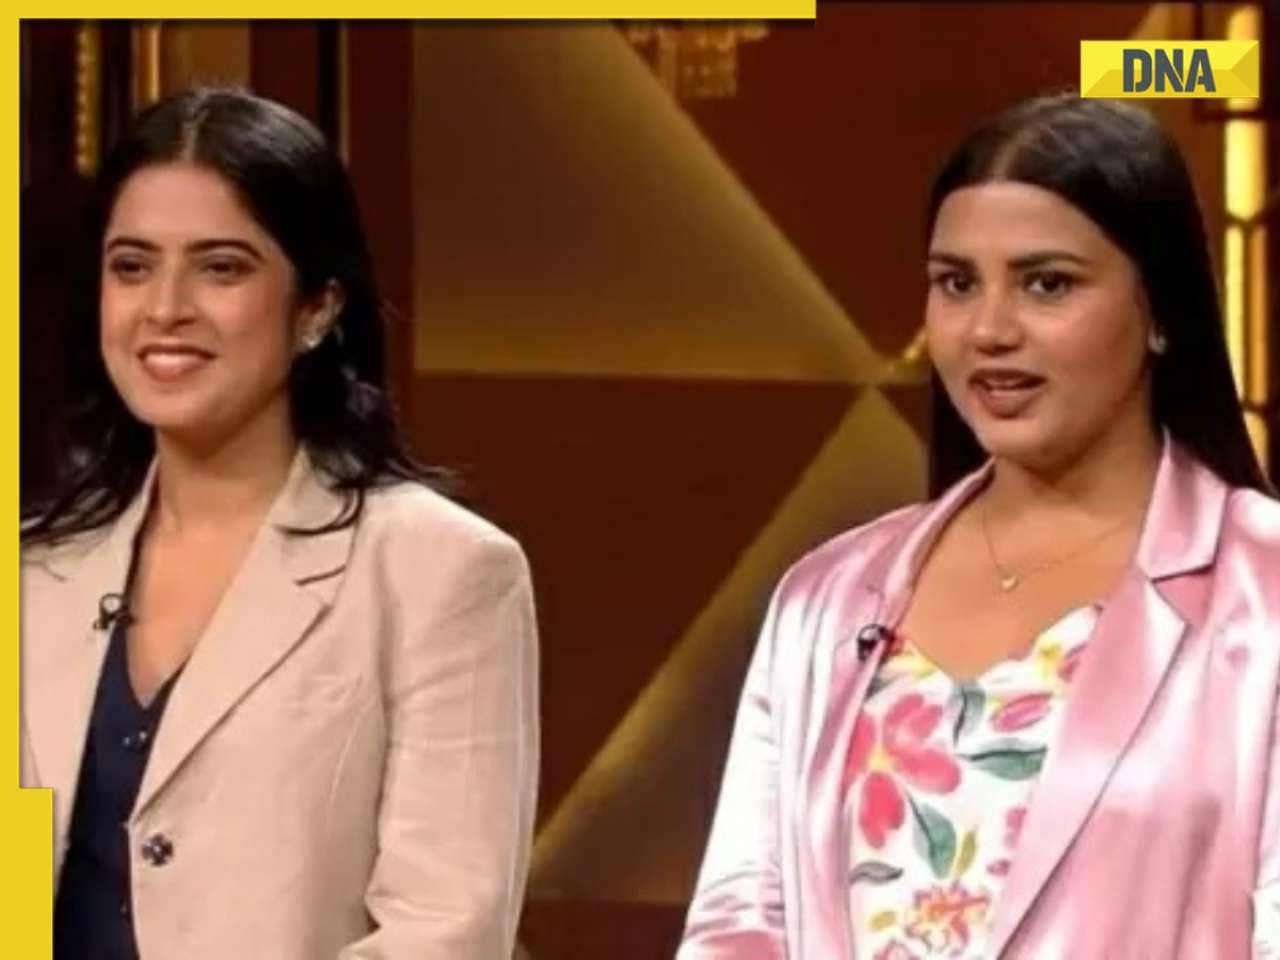 Meet women who asked for Rs 80 lakh from sharks on Shark tank India but walked away without money due to...